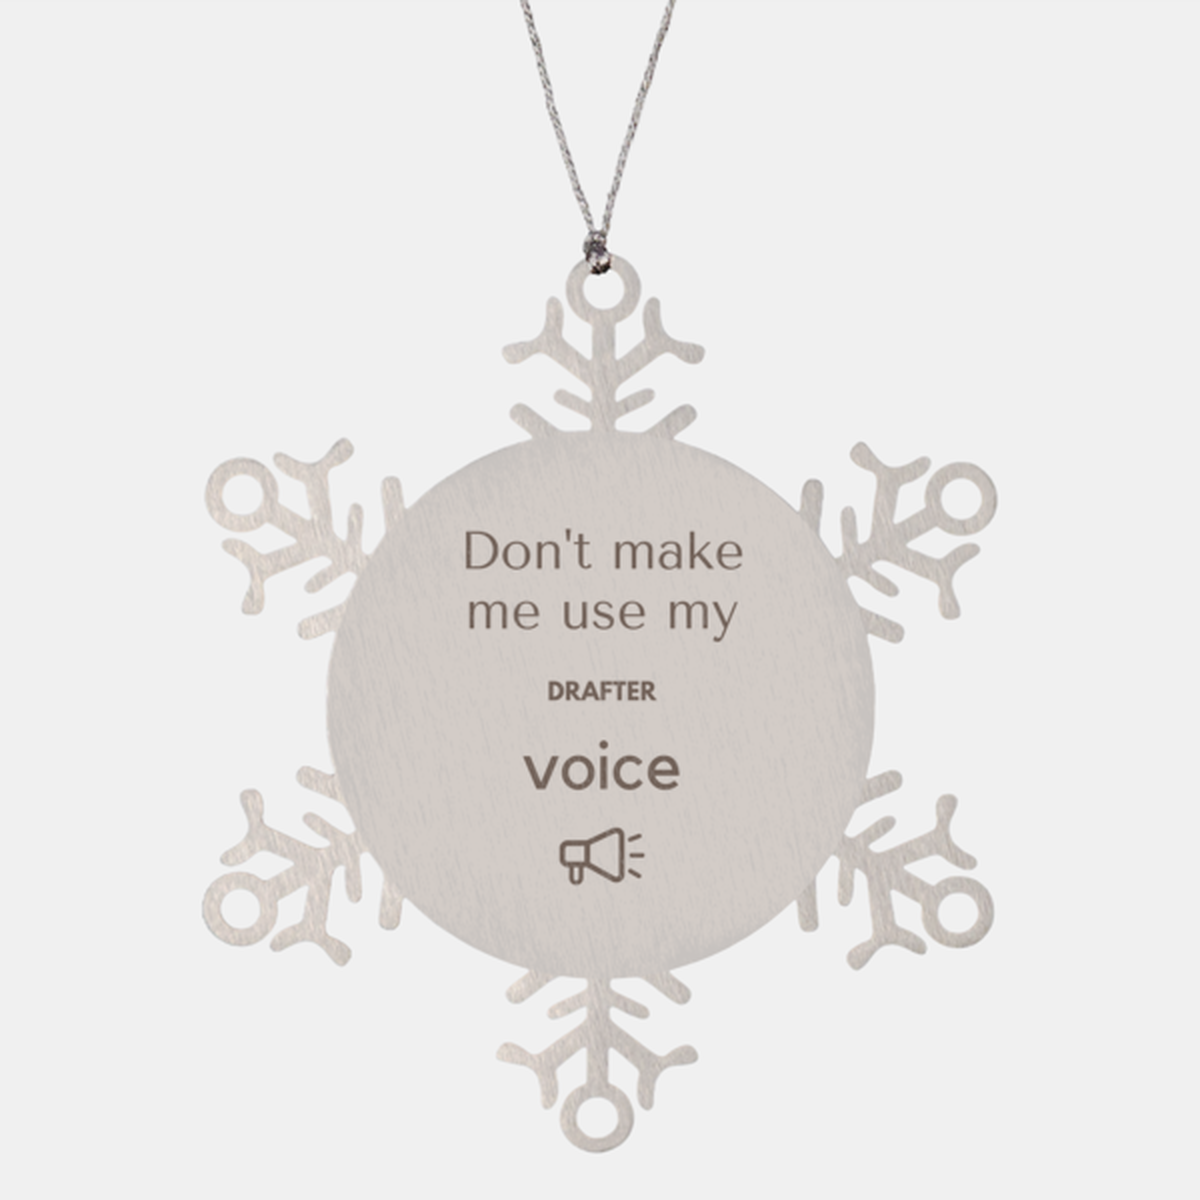 Don't make me use my Drafter voice, Sarcasm Drafter Ornament Gifts, Christmas Drafter Snowflake Ornament Unique Gifts For Drafter Coworkers, Men, Women, Colleague, Friends